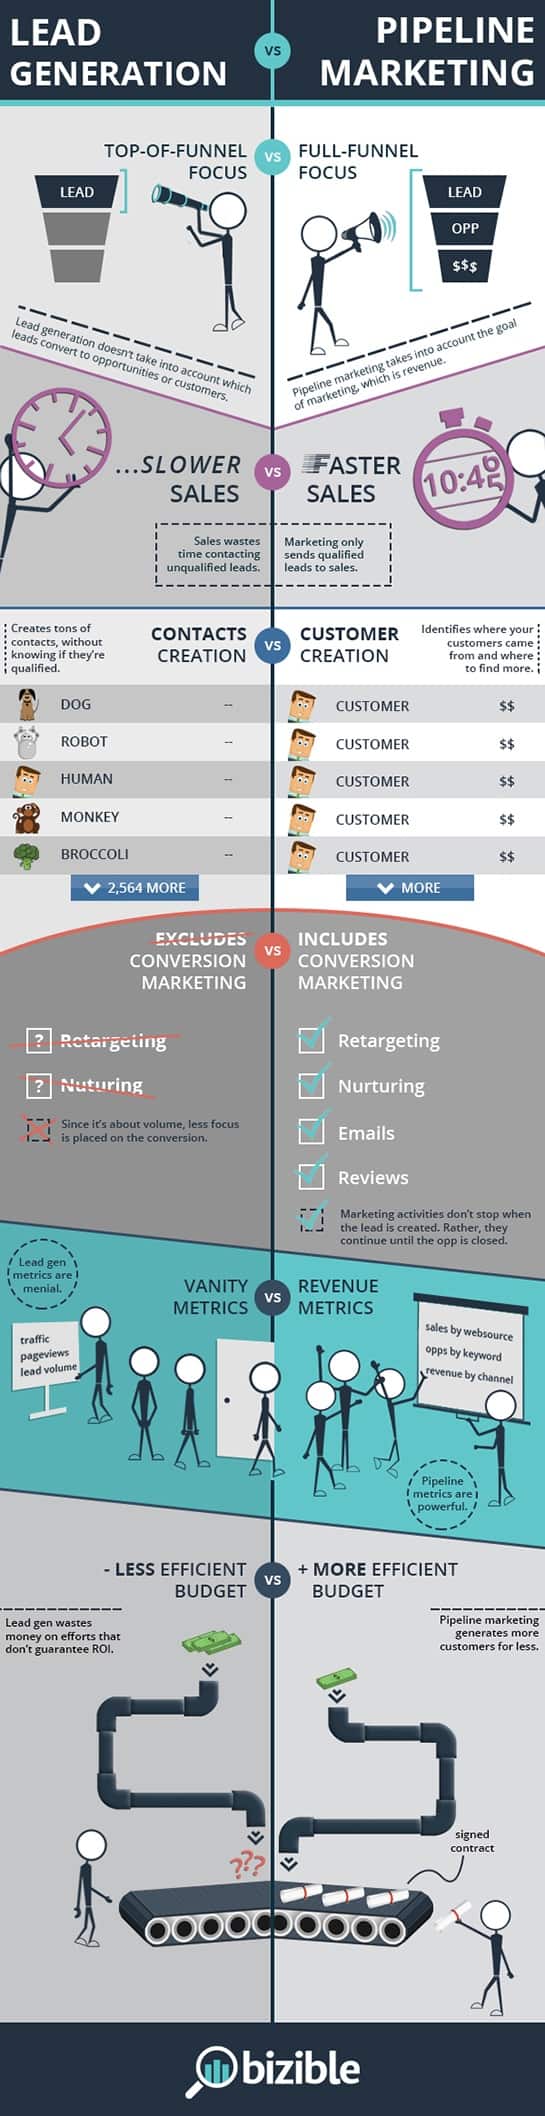 Difference Between Lead Generation and Pipeline Marketing Infographic